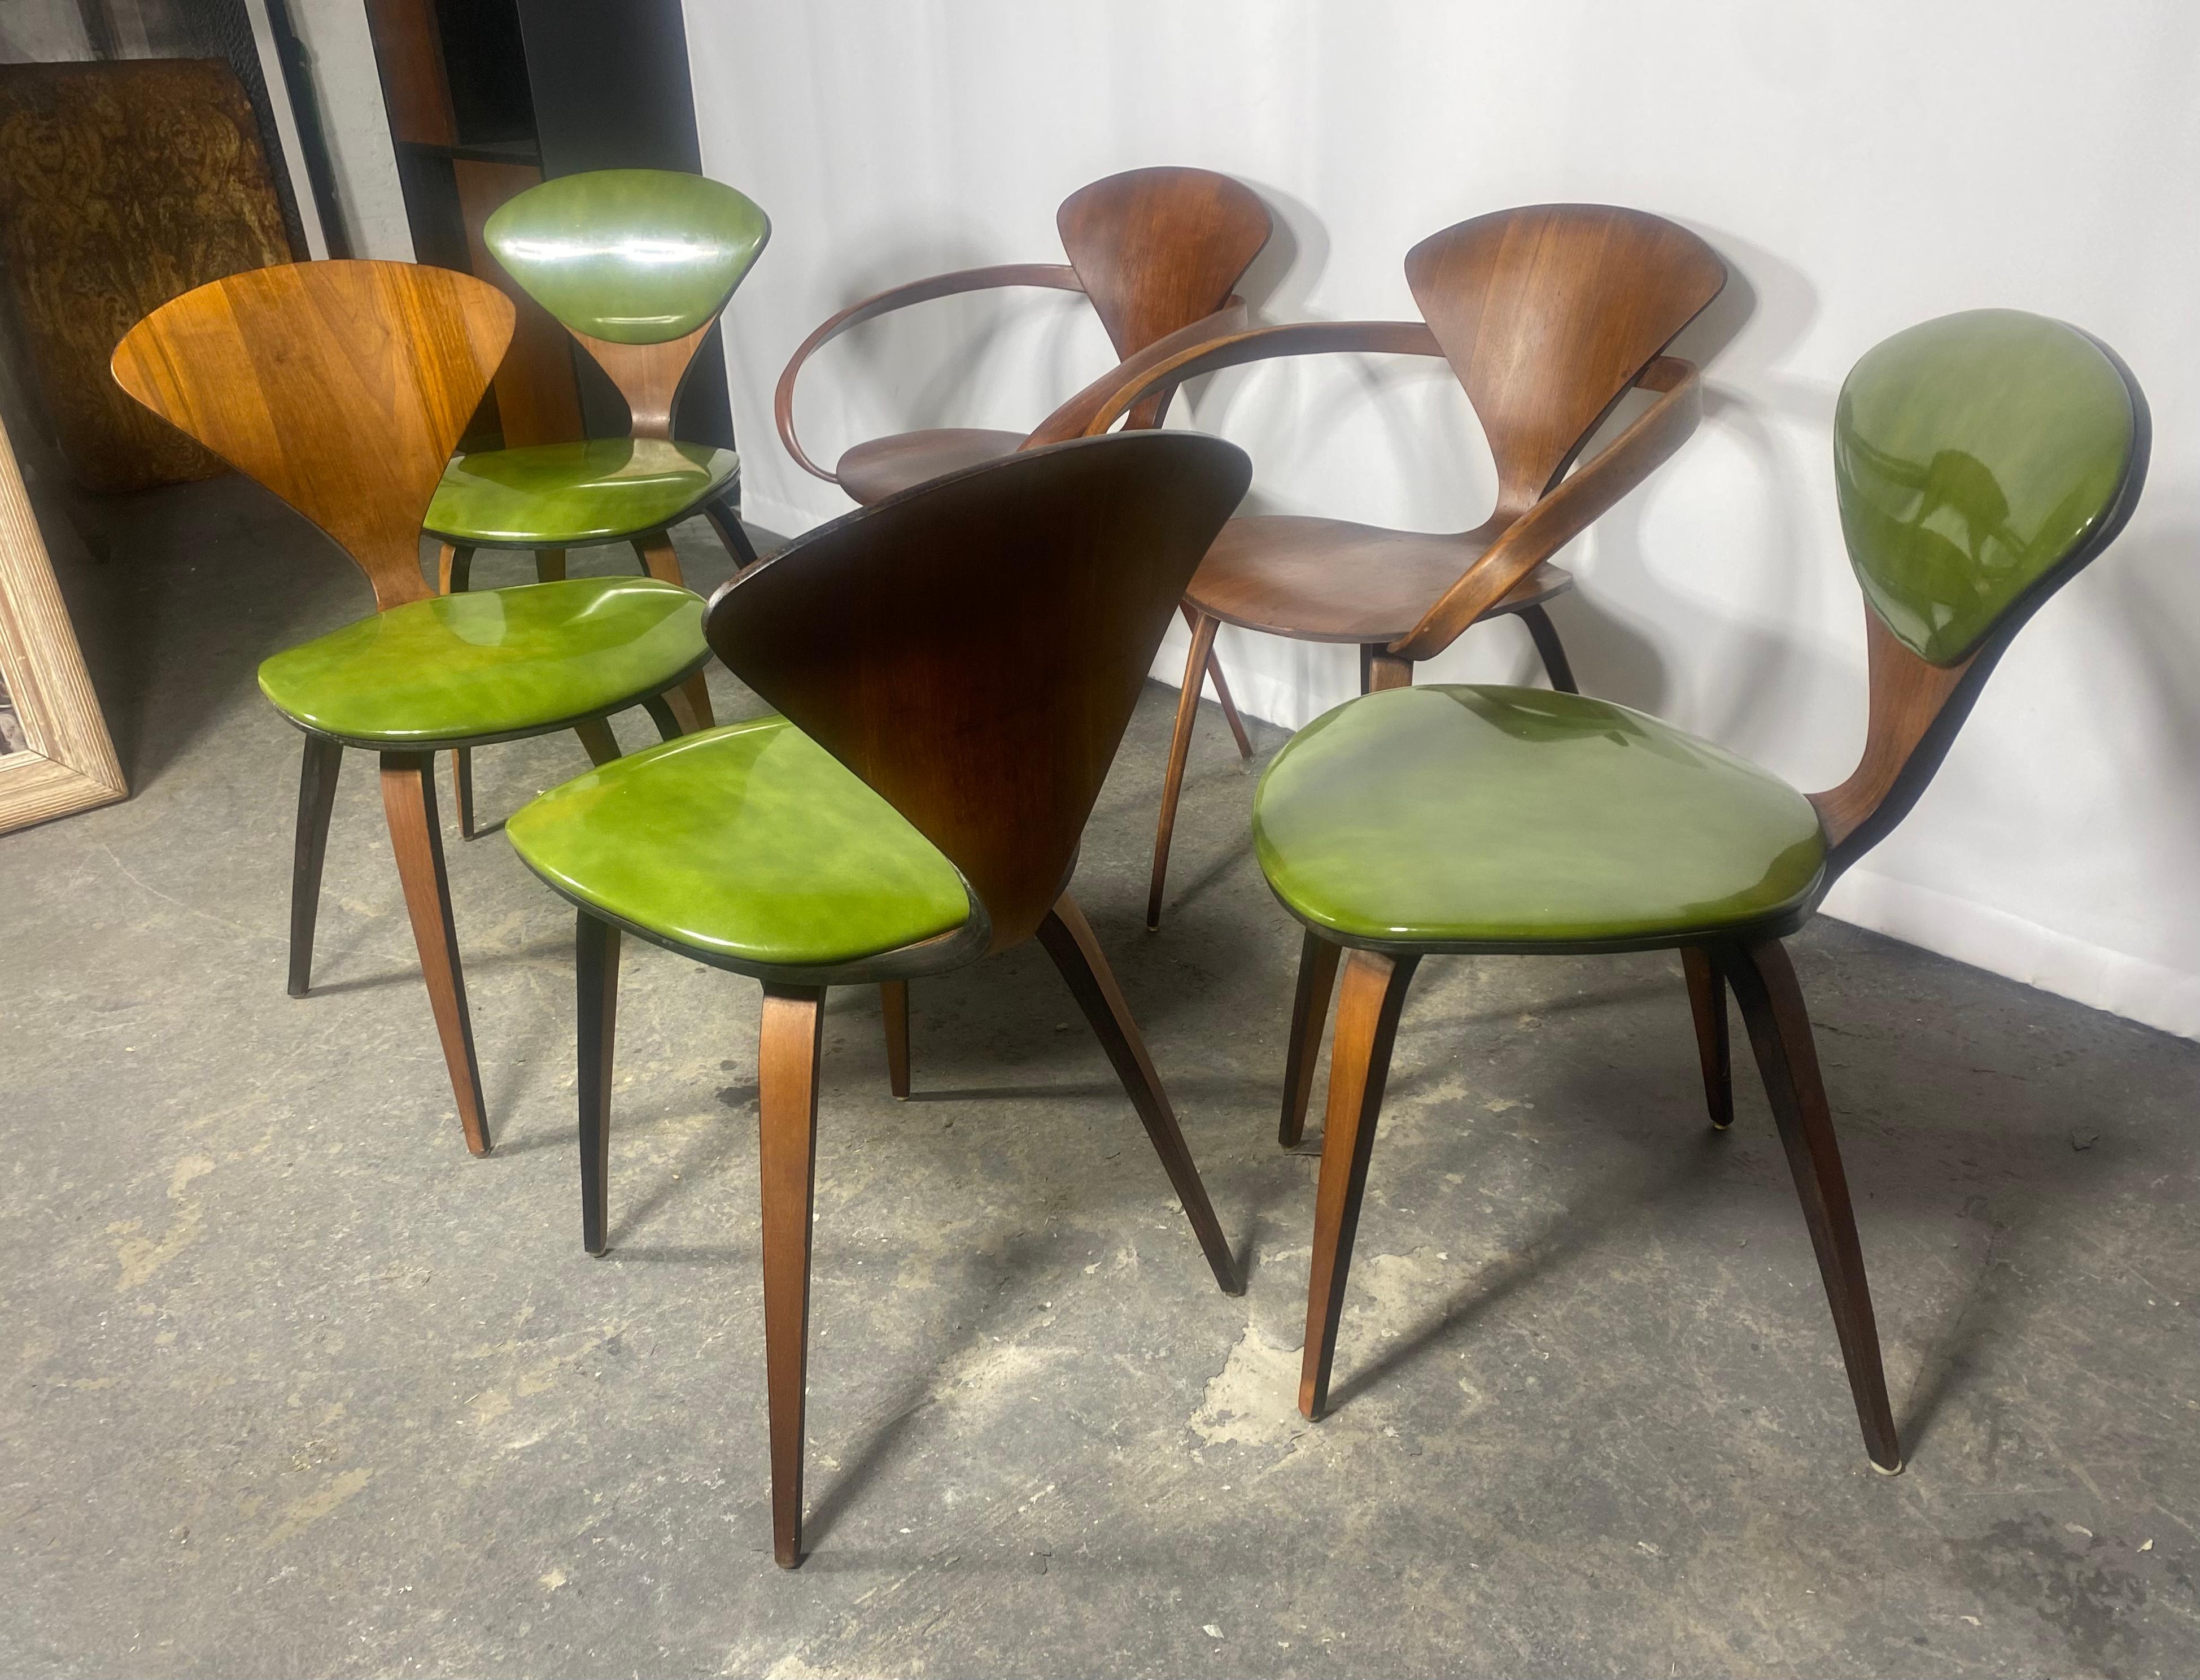 American Set of 6 Norman Cherner Dining Chairs, Made by Plycraft, USA, 1963. 2 Arm Chairs For Sale